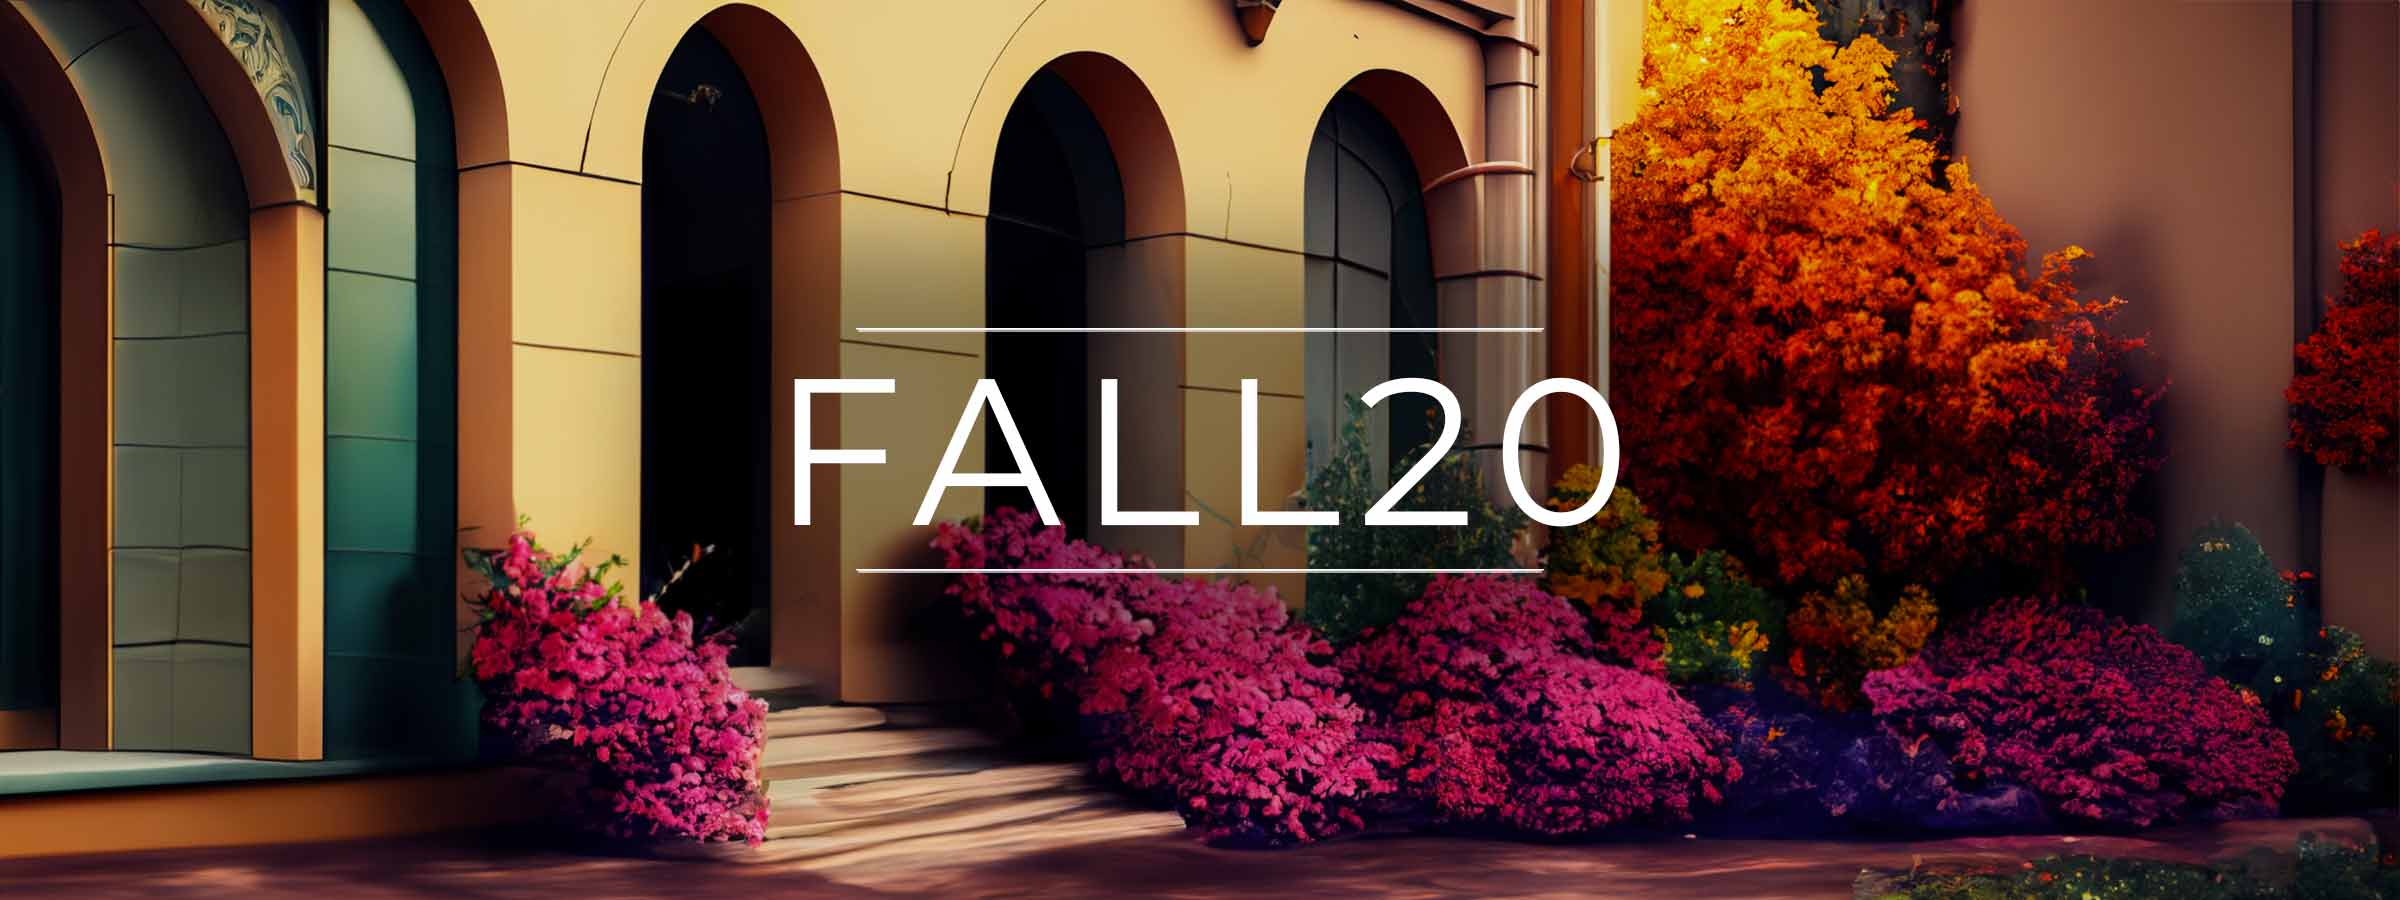 Celebrate the Fall season with a 20% discount - Use code FALL20 at checkout - Design Italy